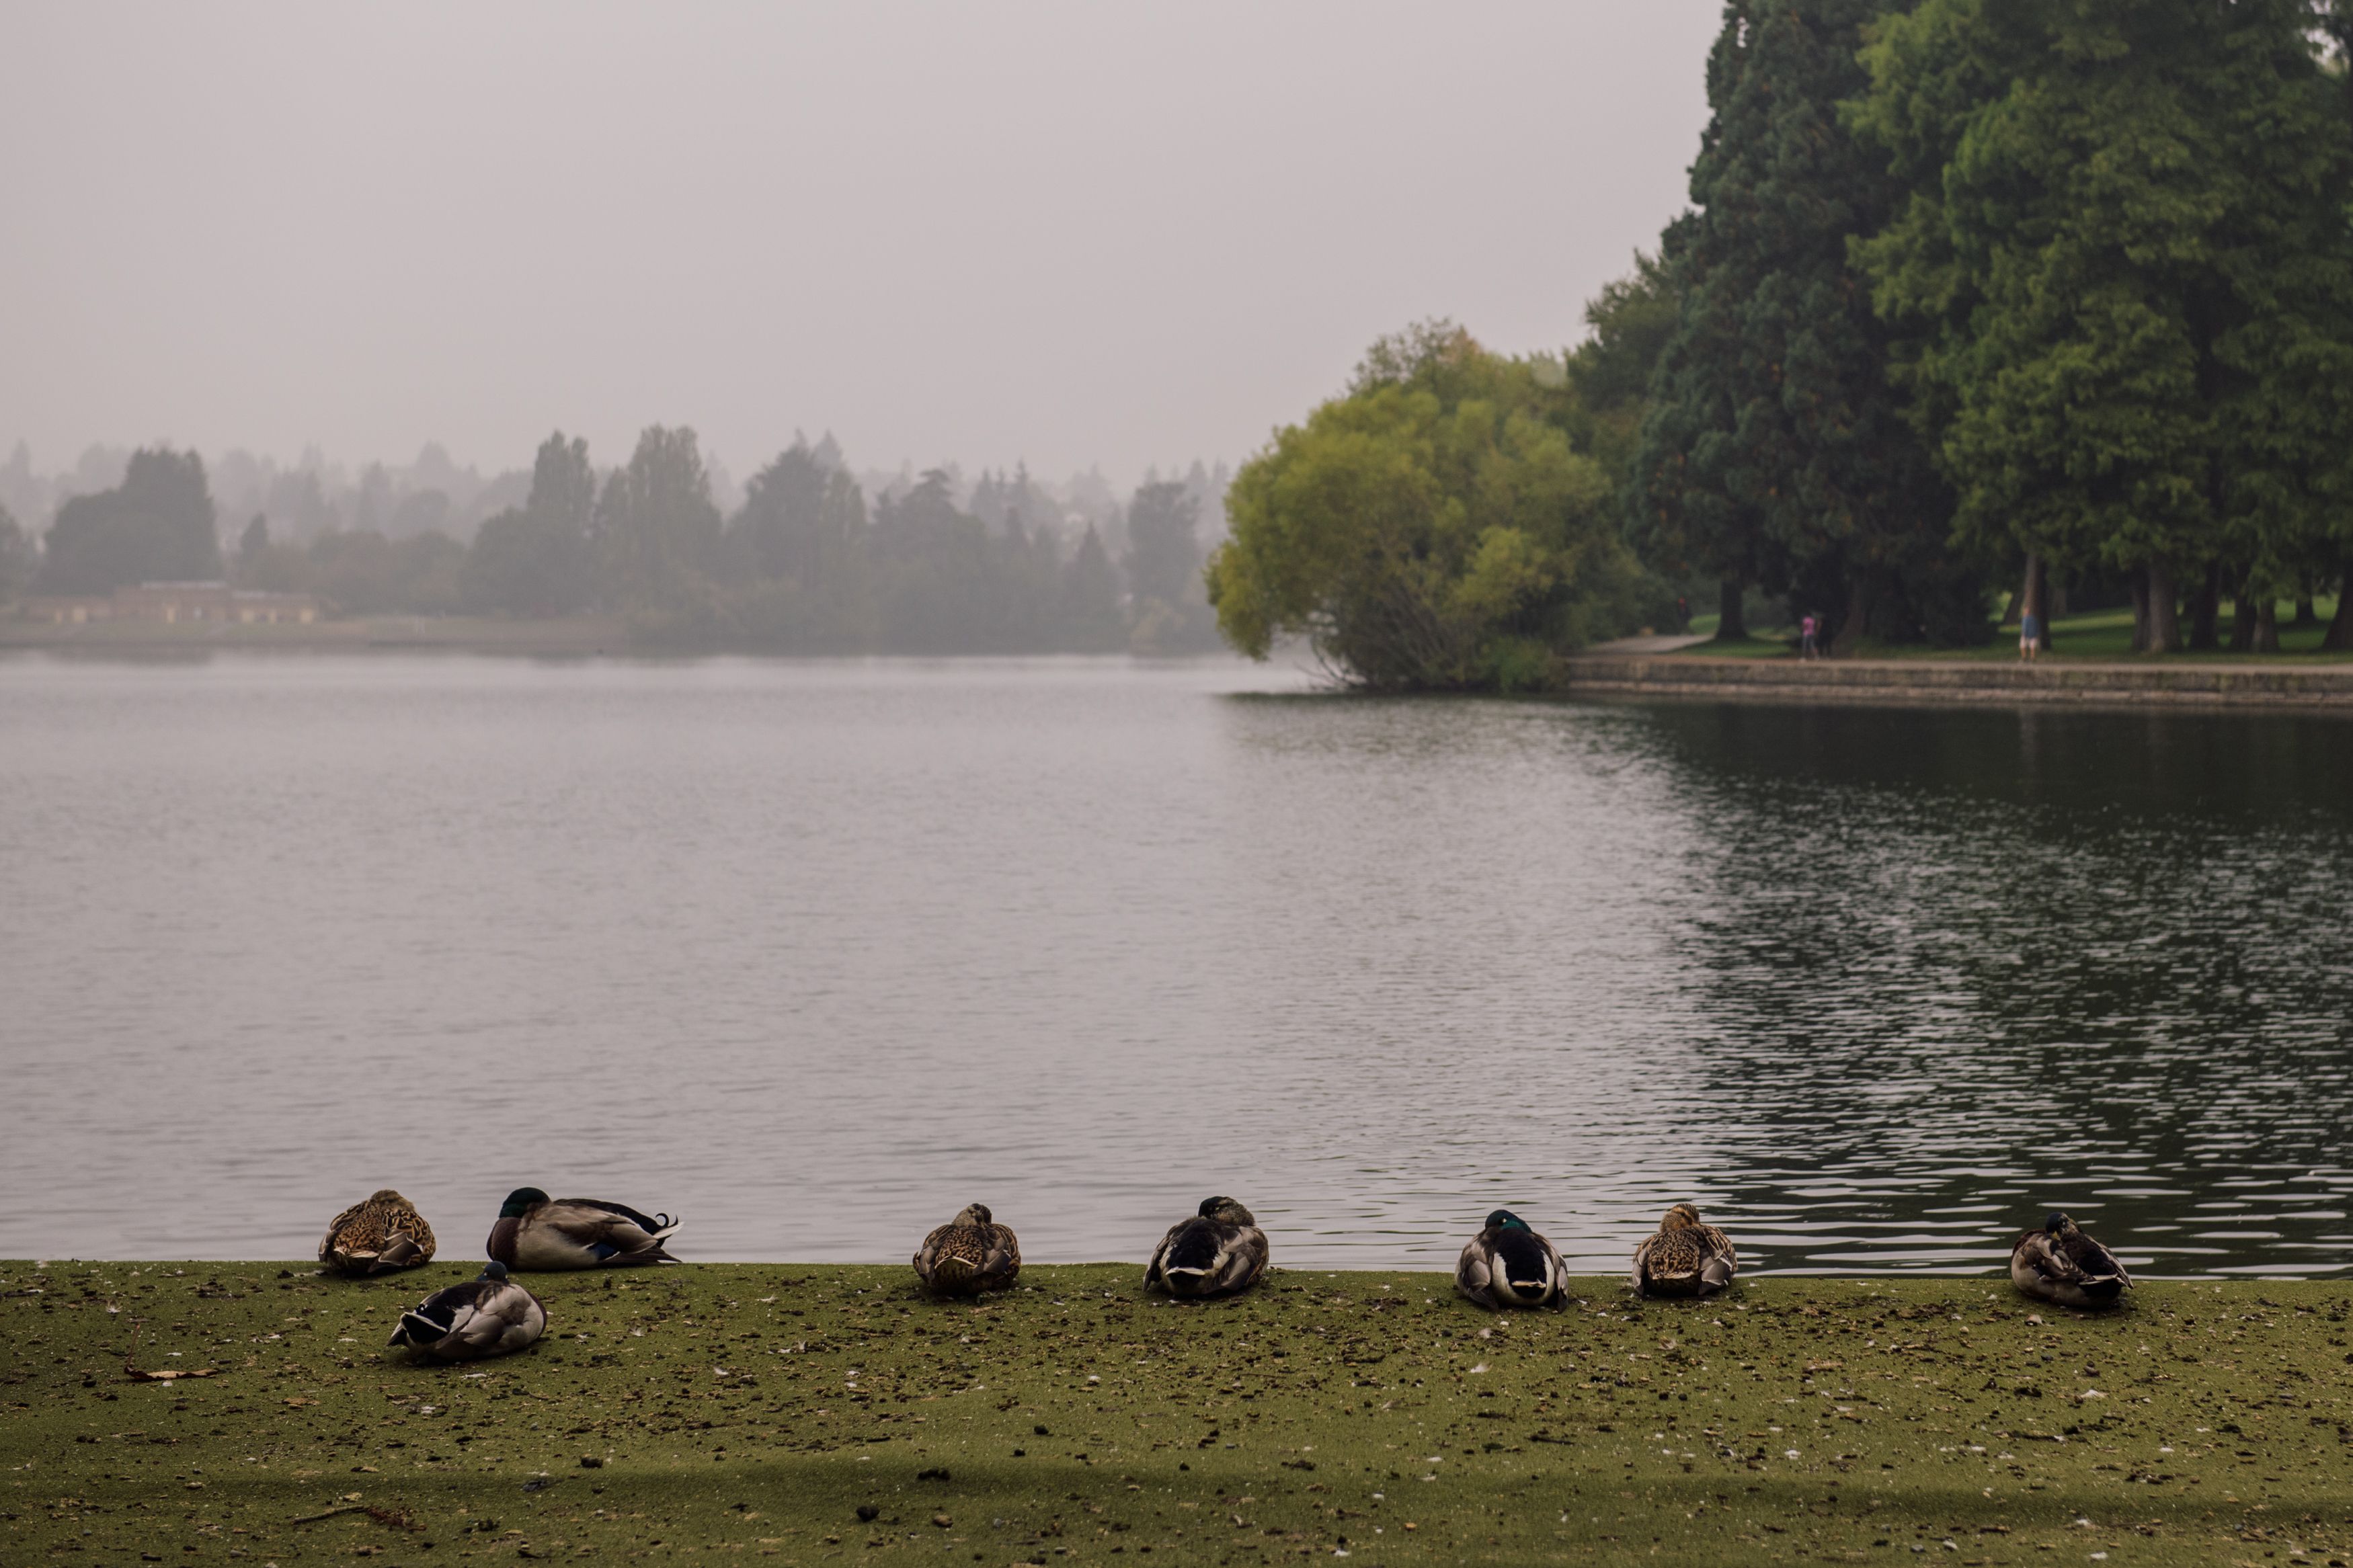 About eight ducks sit in a row on a green embankment on the edge of a lake, looking out into a distance that is hazy and smoky over the lake.